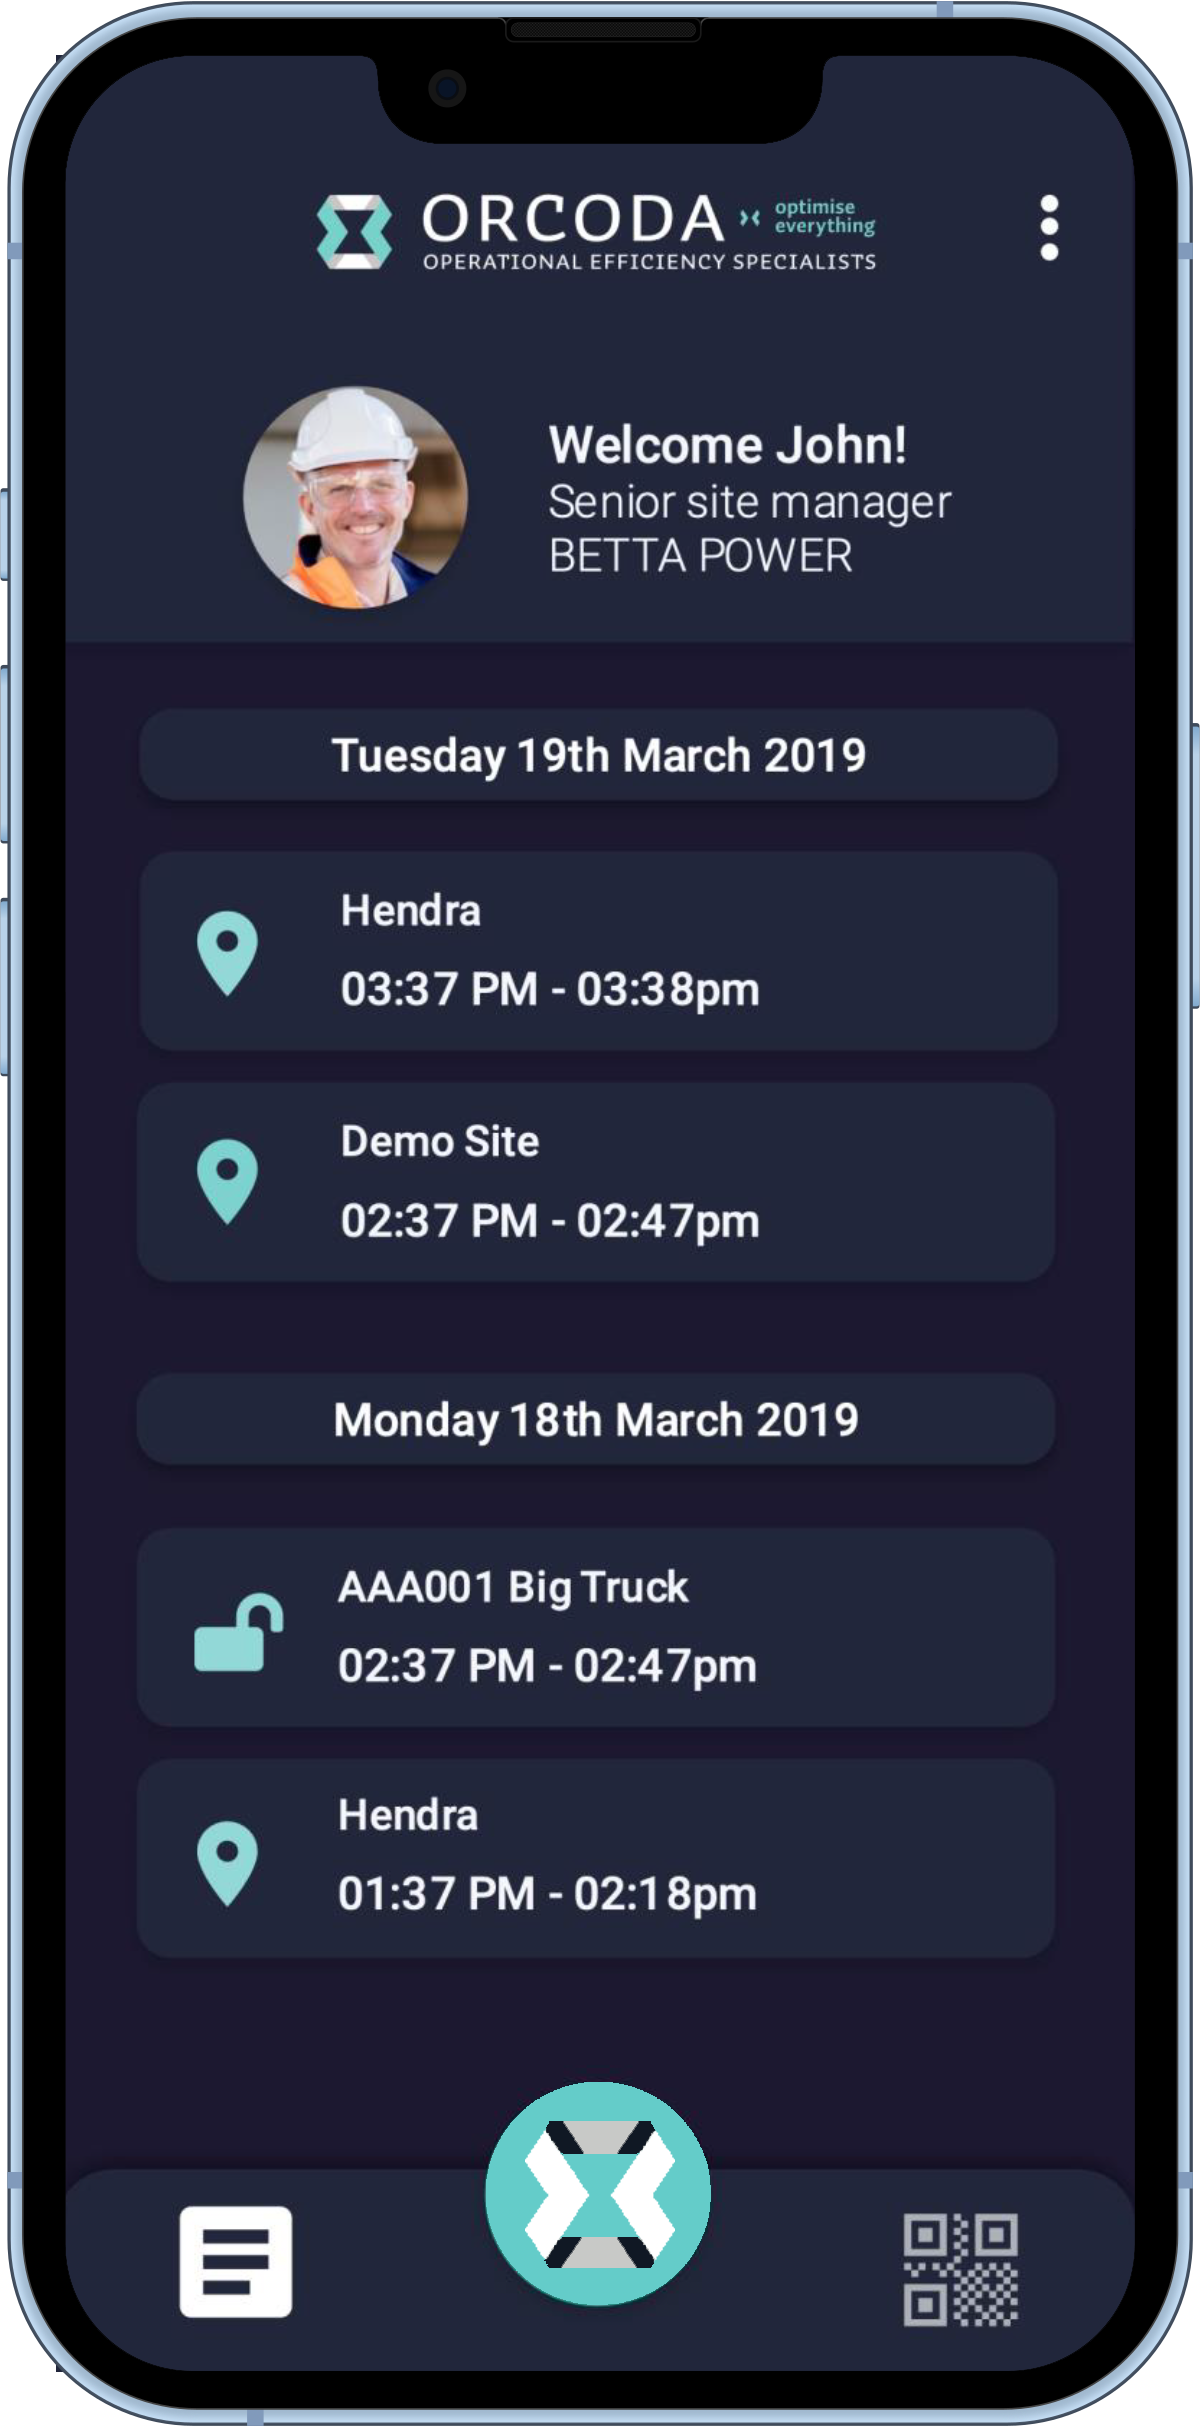 Worker Profiles in the OWLS Mobile App